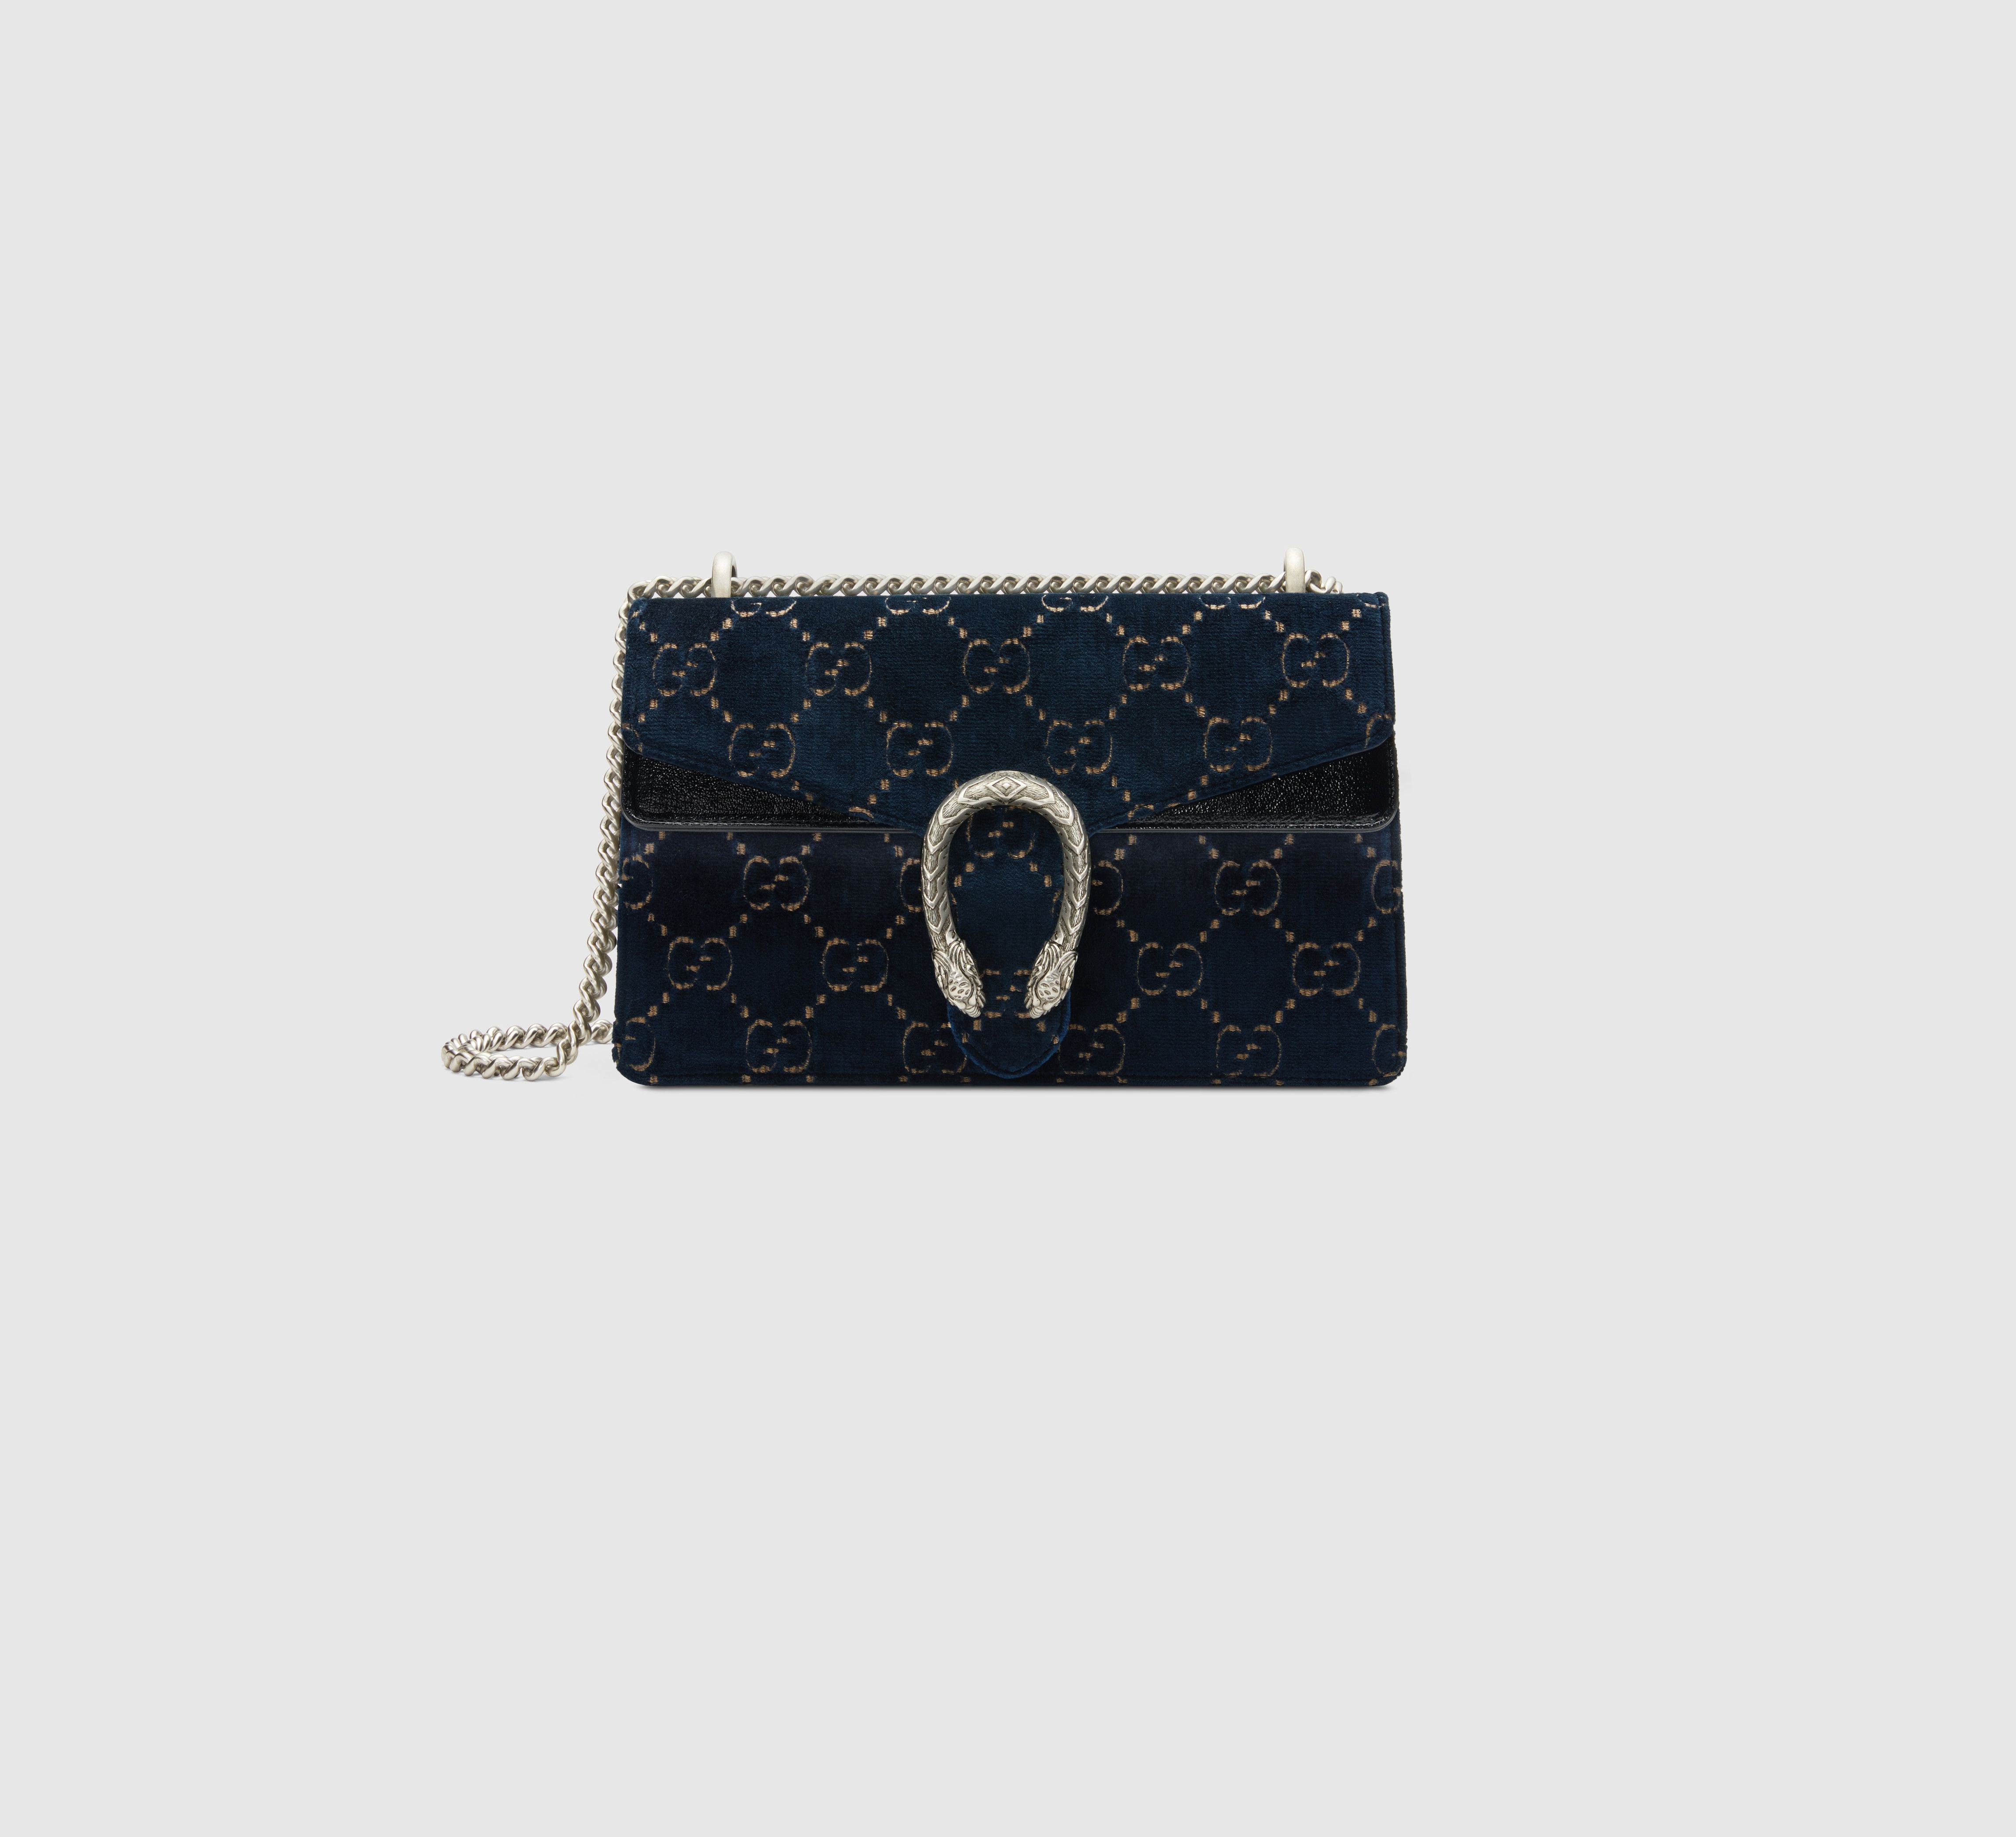 Gucci - From Gucci Pre-Fall 2018 by Alessandro Michele, new Gucci Ophidia  bag shapes in GG motif with inlaid House Web stripe.